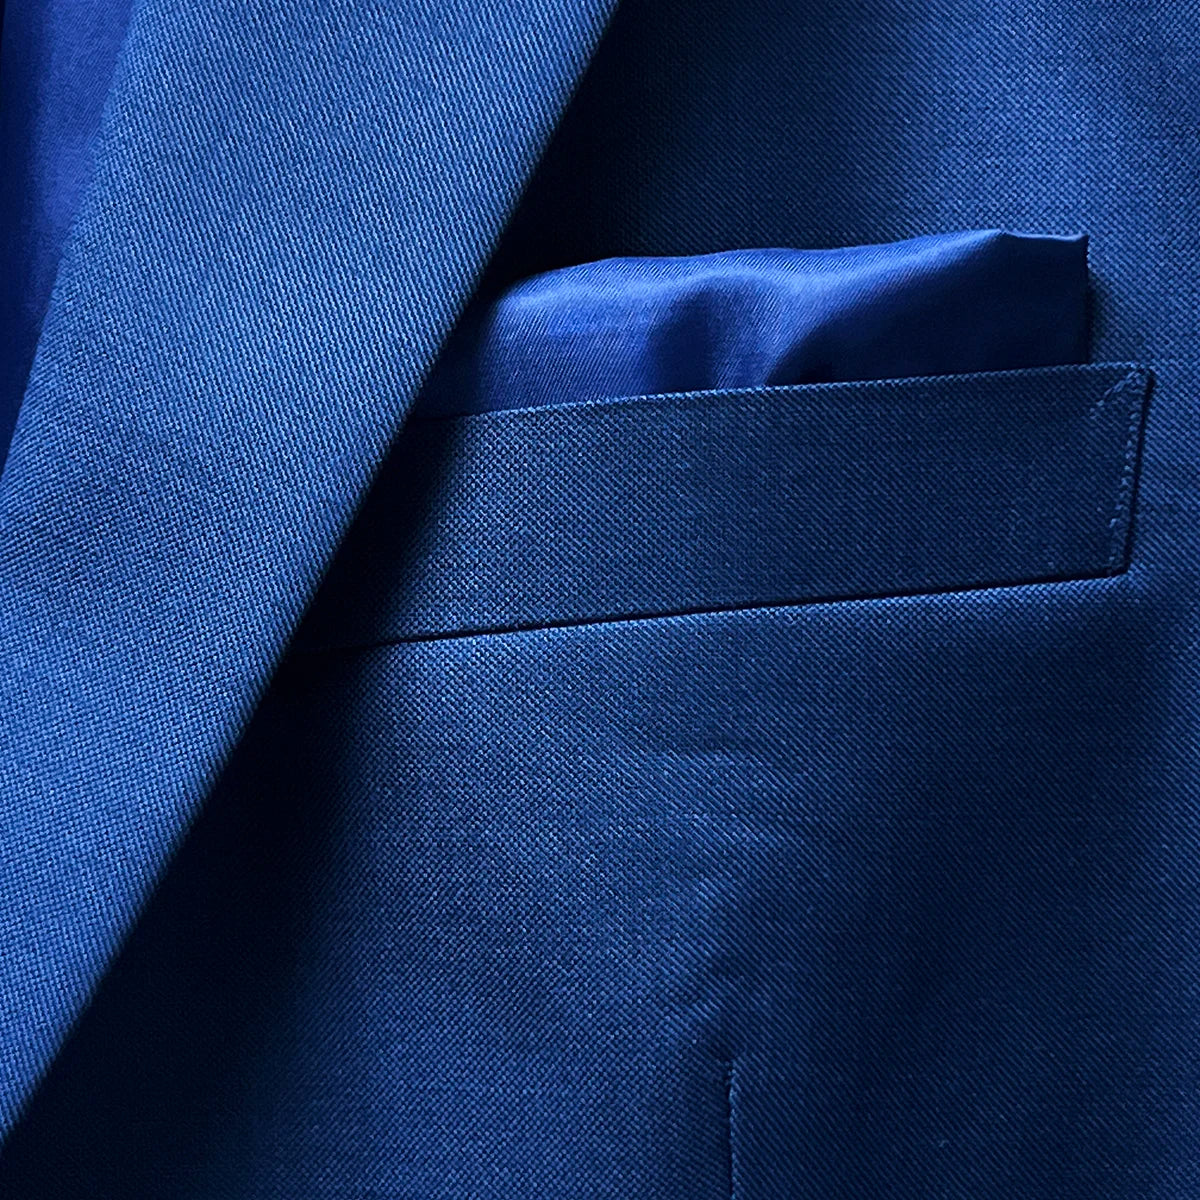 Image showcasing the built-in pocket square feature on the cobalt blue sharkskin suit.